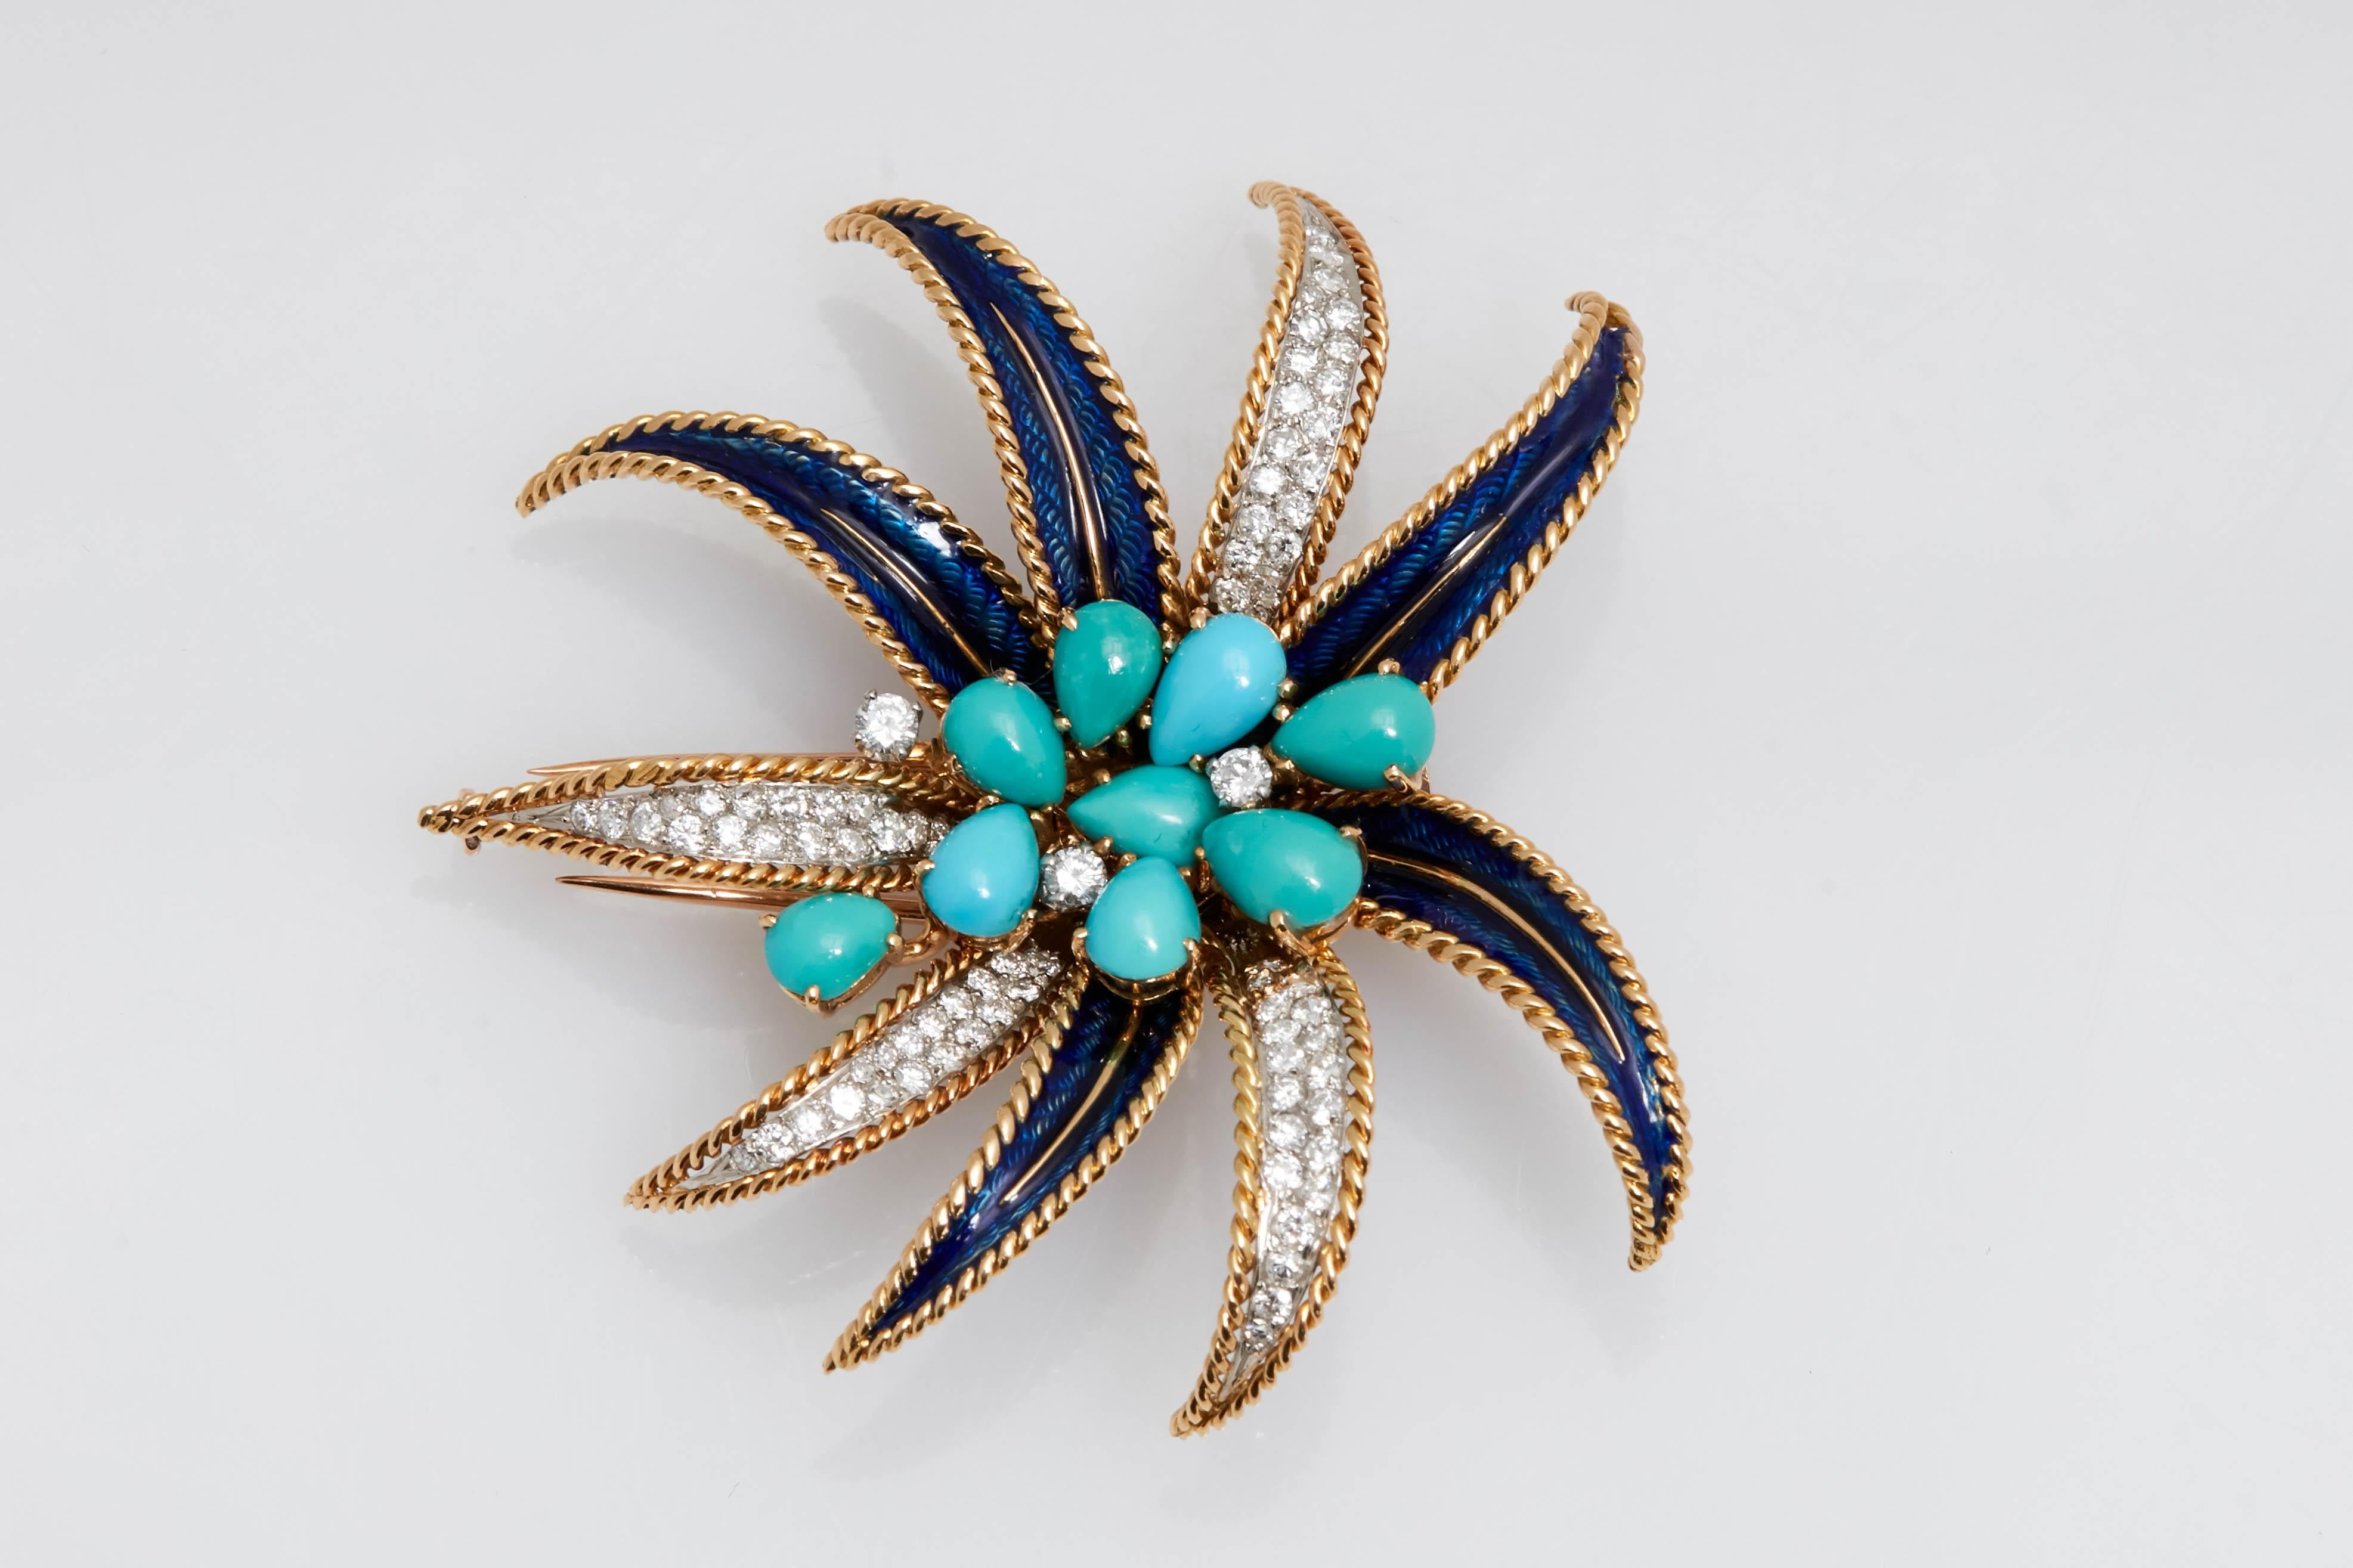 An unusual Bulgari brooch mounted in 18kt yellow gold resembling a Palm tree branch, embellished with turquoise, diamonds and fine blue enameling. Made in Italy, circa 1965